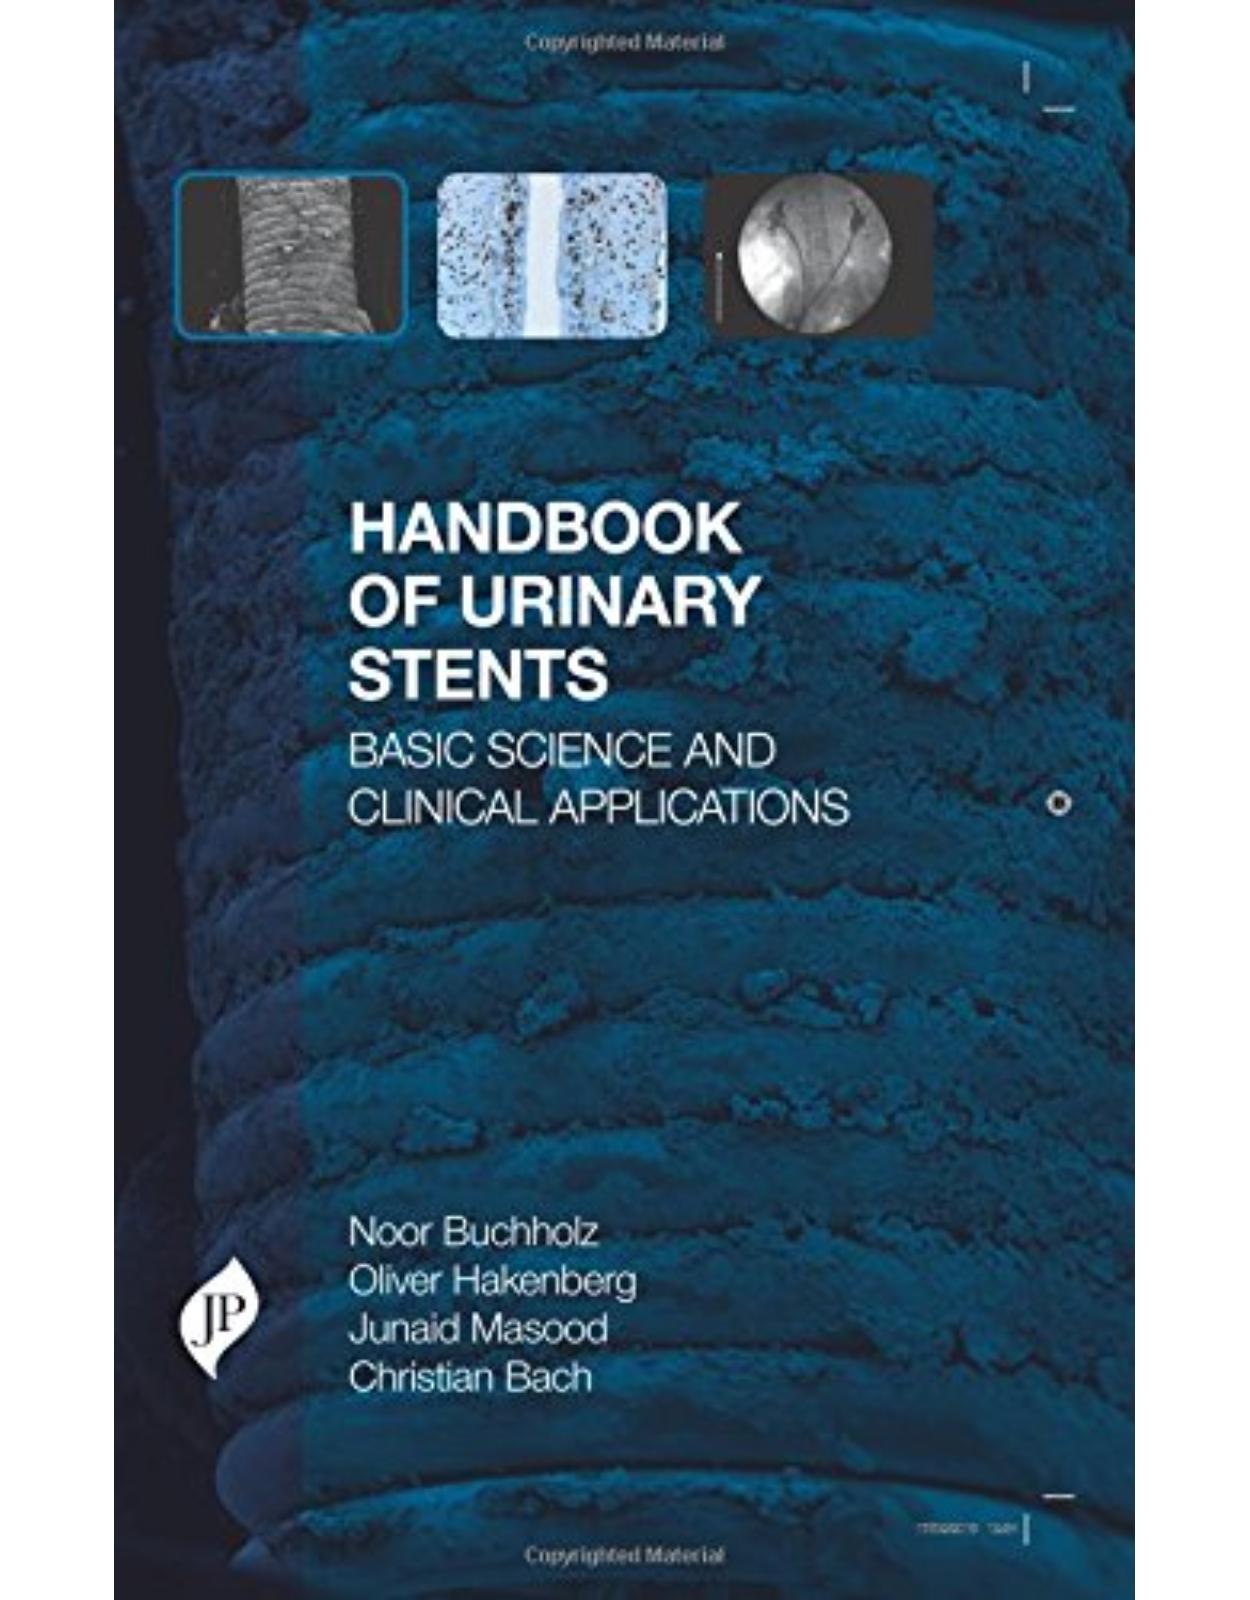 Handbook of Urinary Stents: Basic Science and Clinical Applications